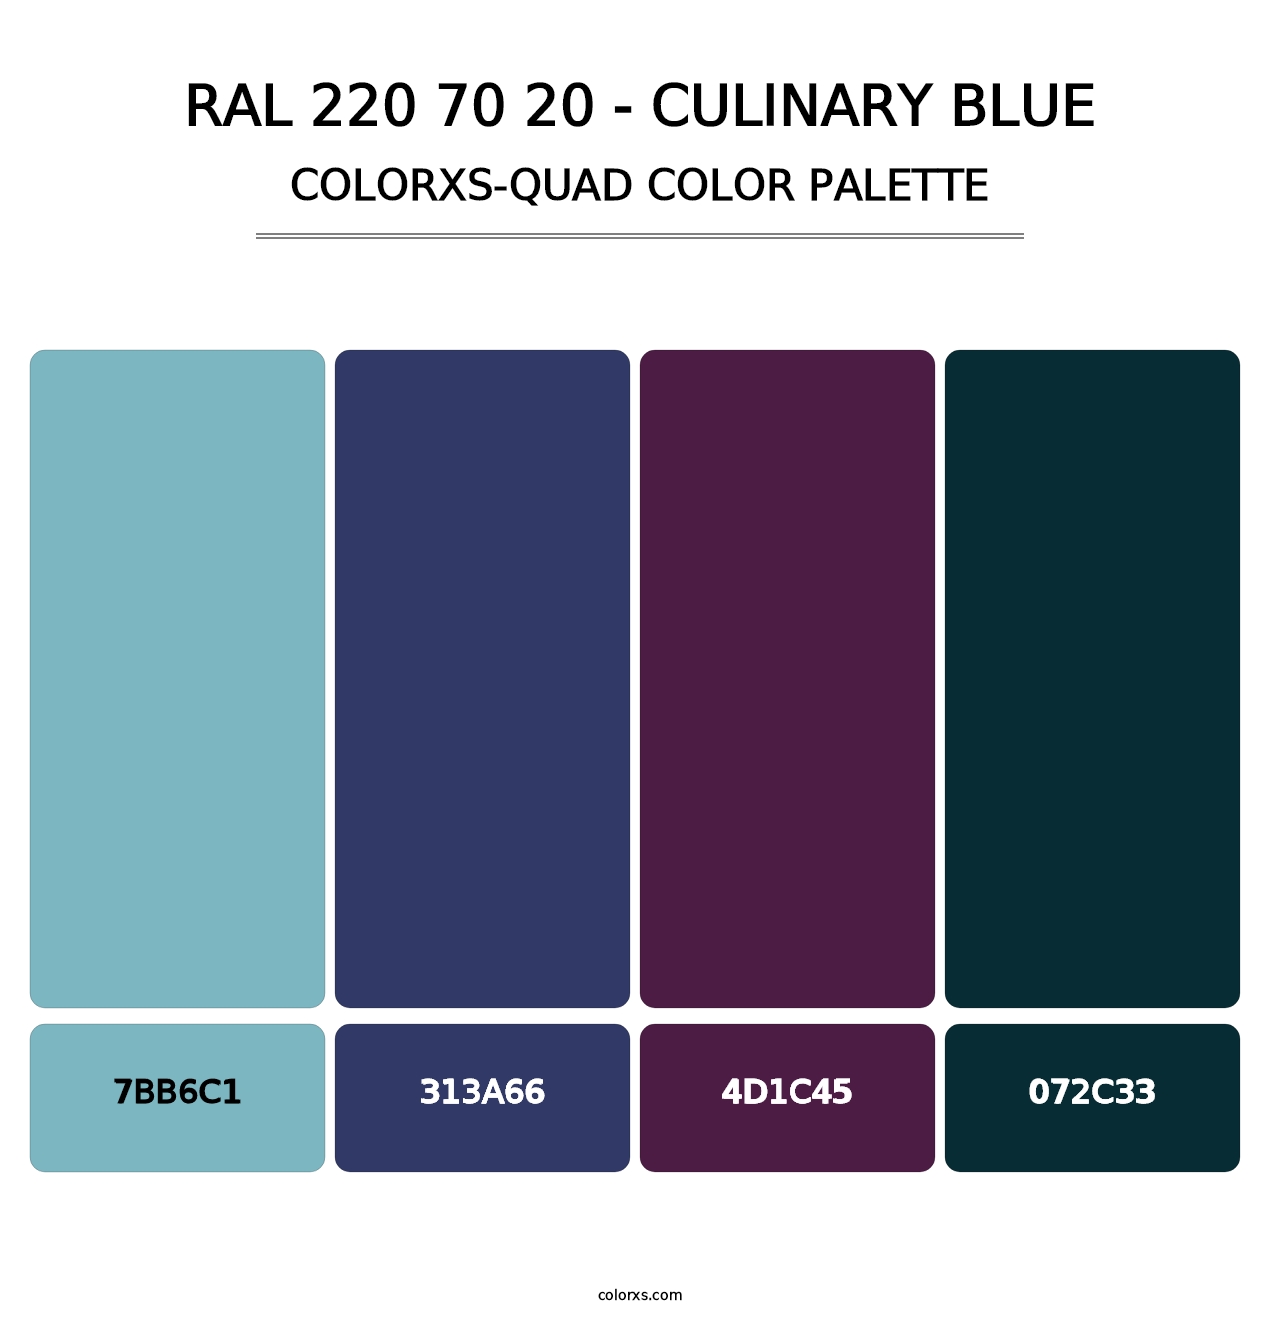 RAL 220 70 20 - Culinary Blue - Colorxs Quad Palette